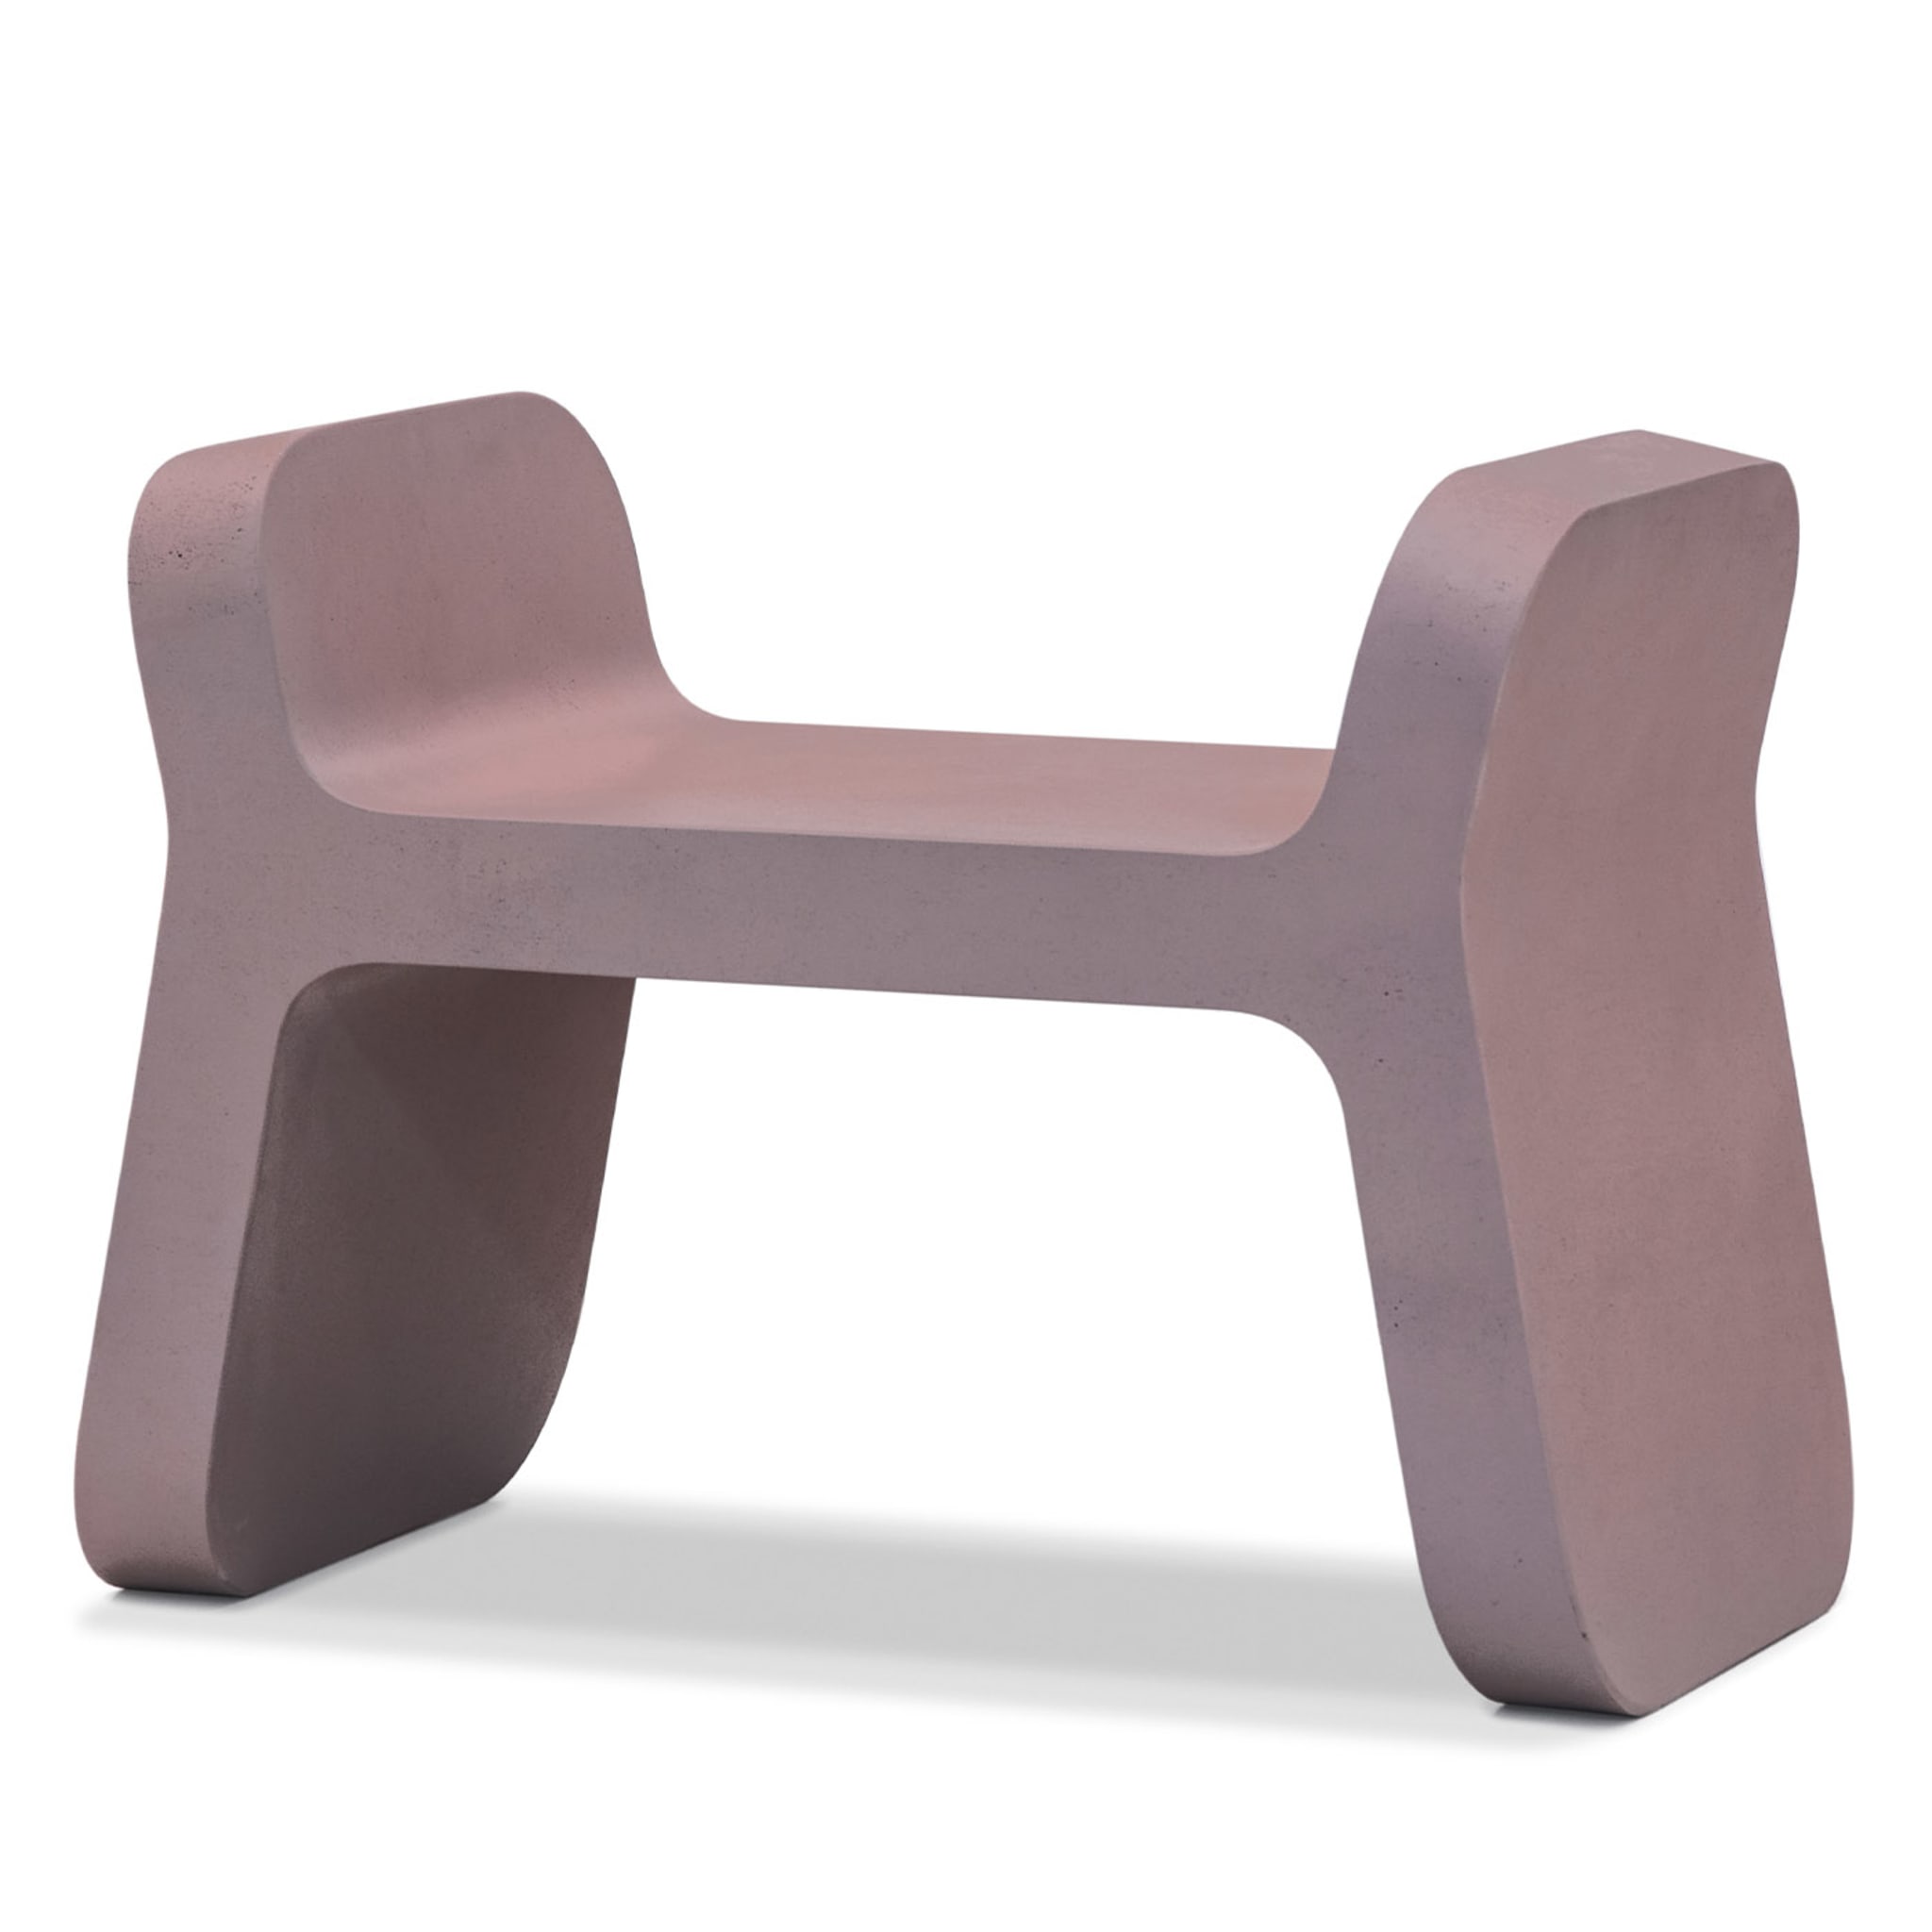 Torcello Small Bench by Defne Koz and Marco Susani - Alternative view 1